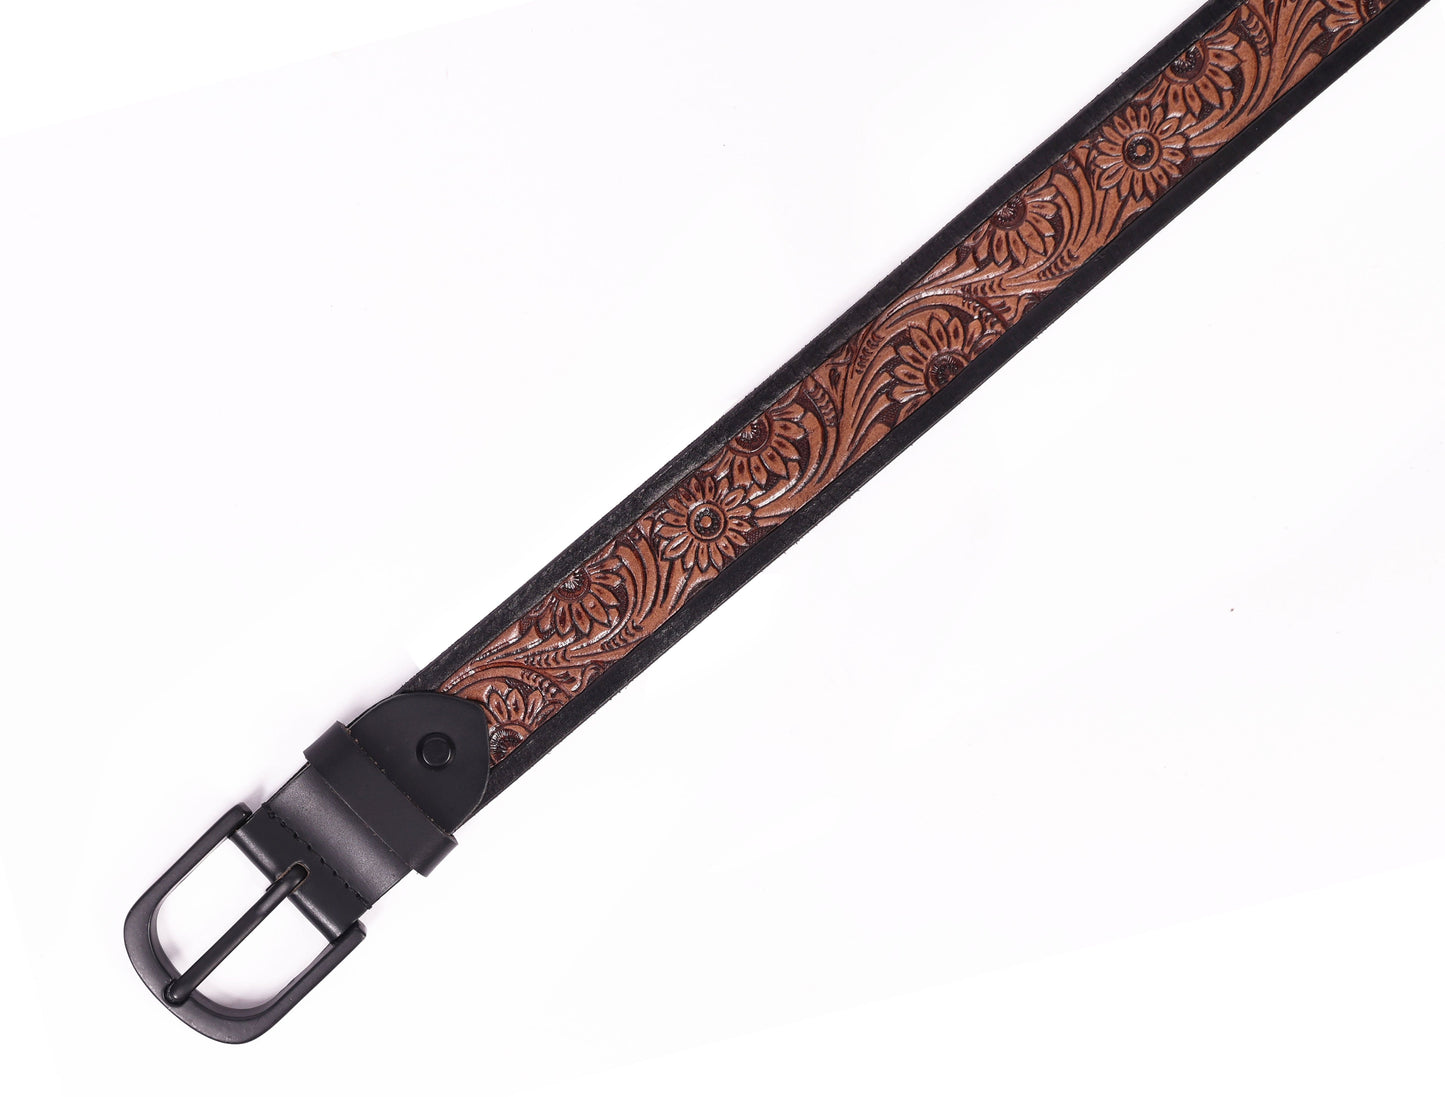 Exquisite Hand-Carved Leather Belt with Black Buckle, Crafted in India - CELTICINDIA